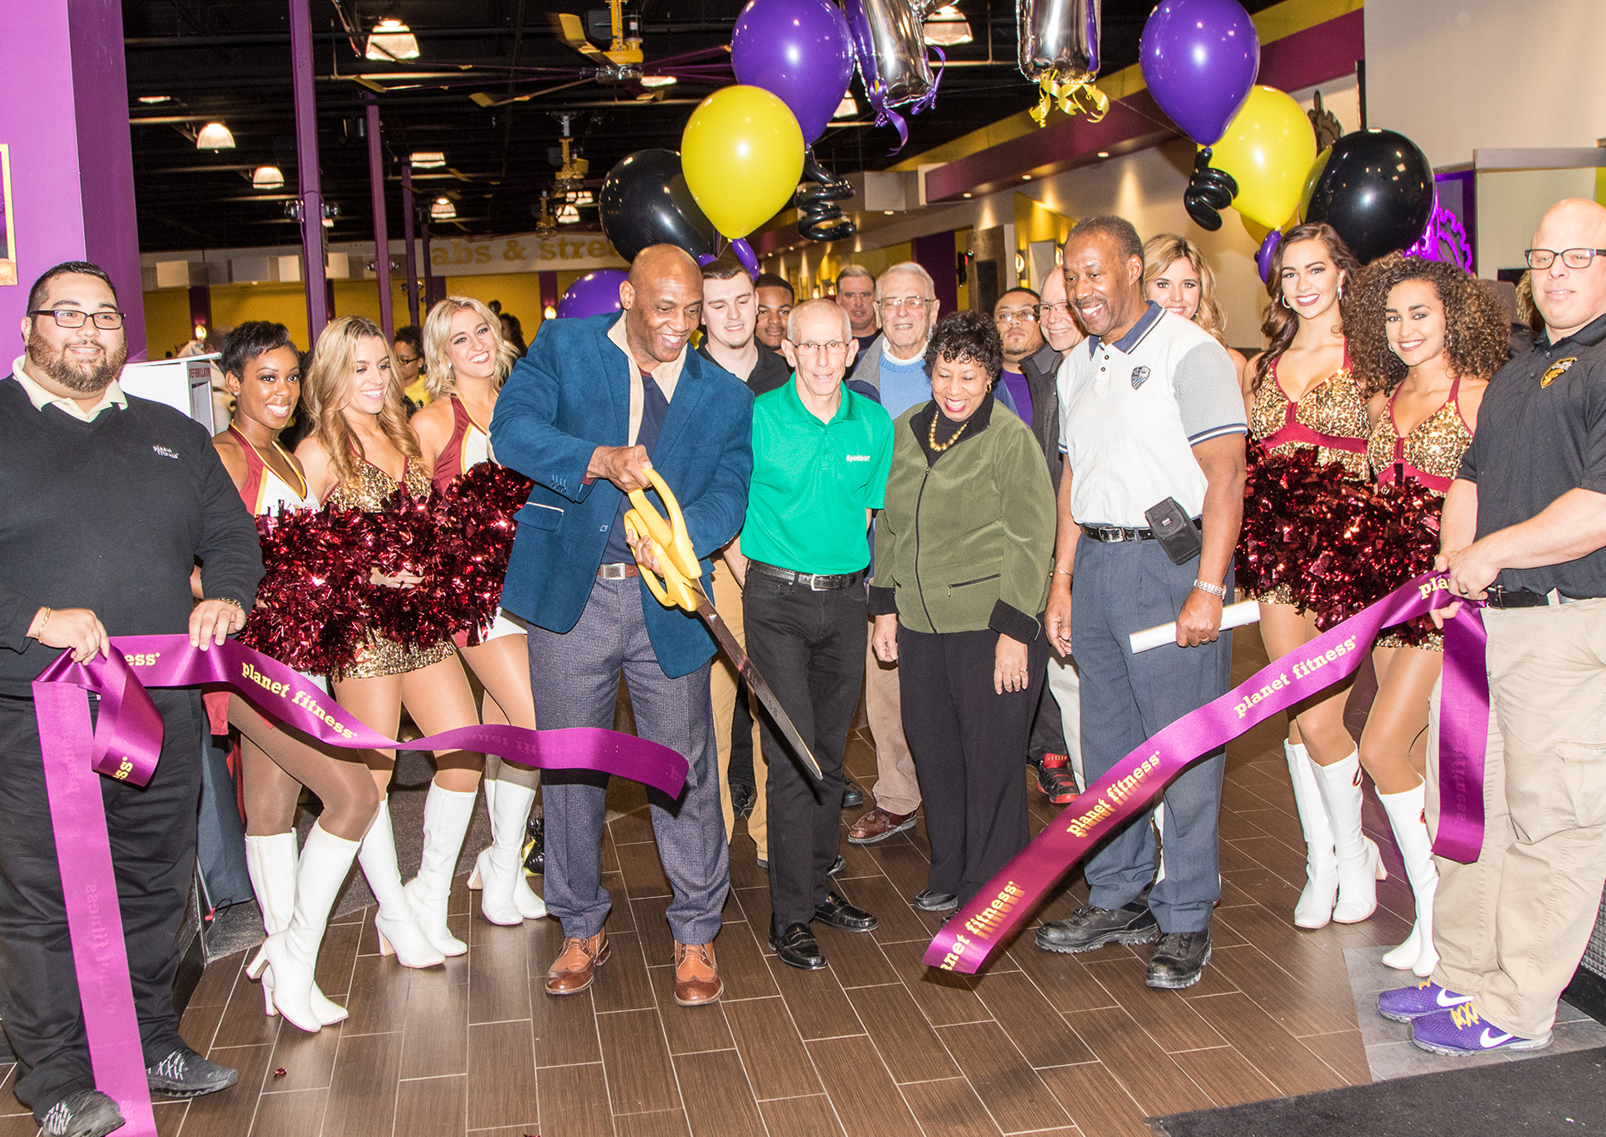 Welcome Planet Fitness – The Village of North Randall, Ohio